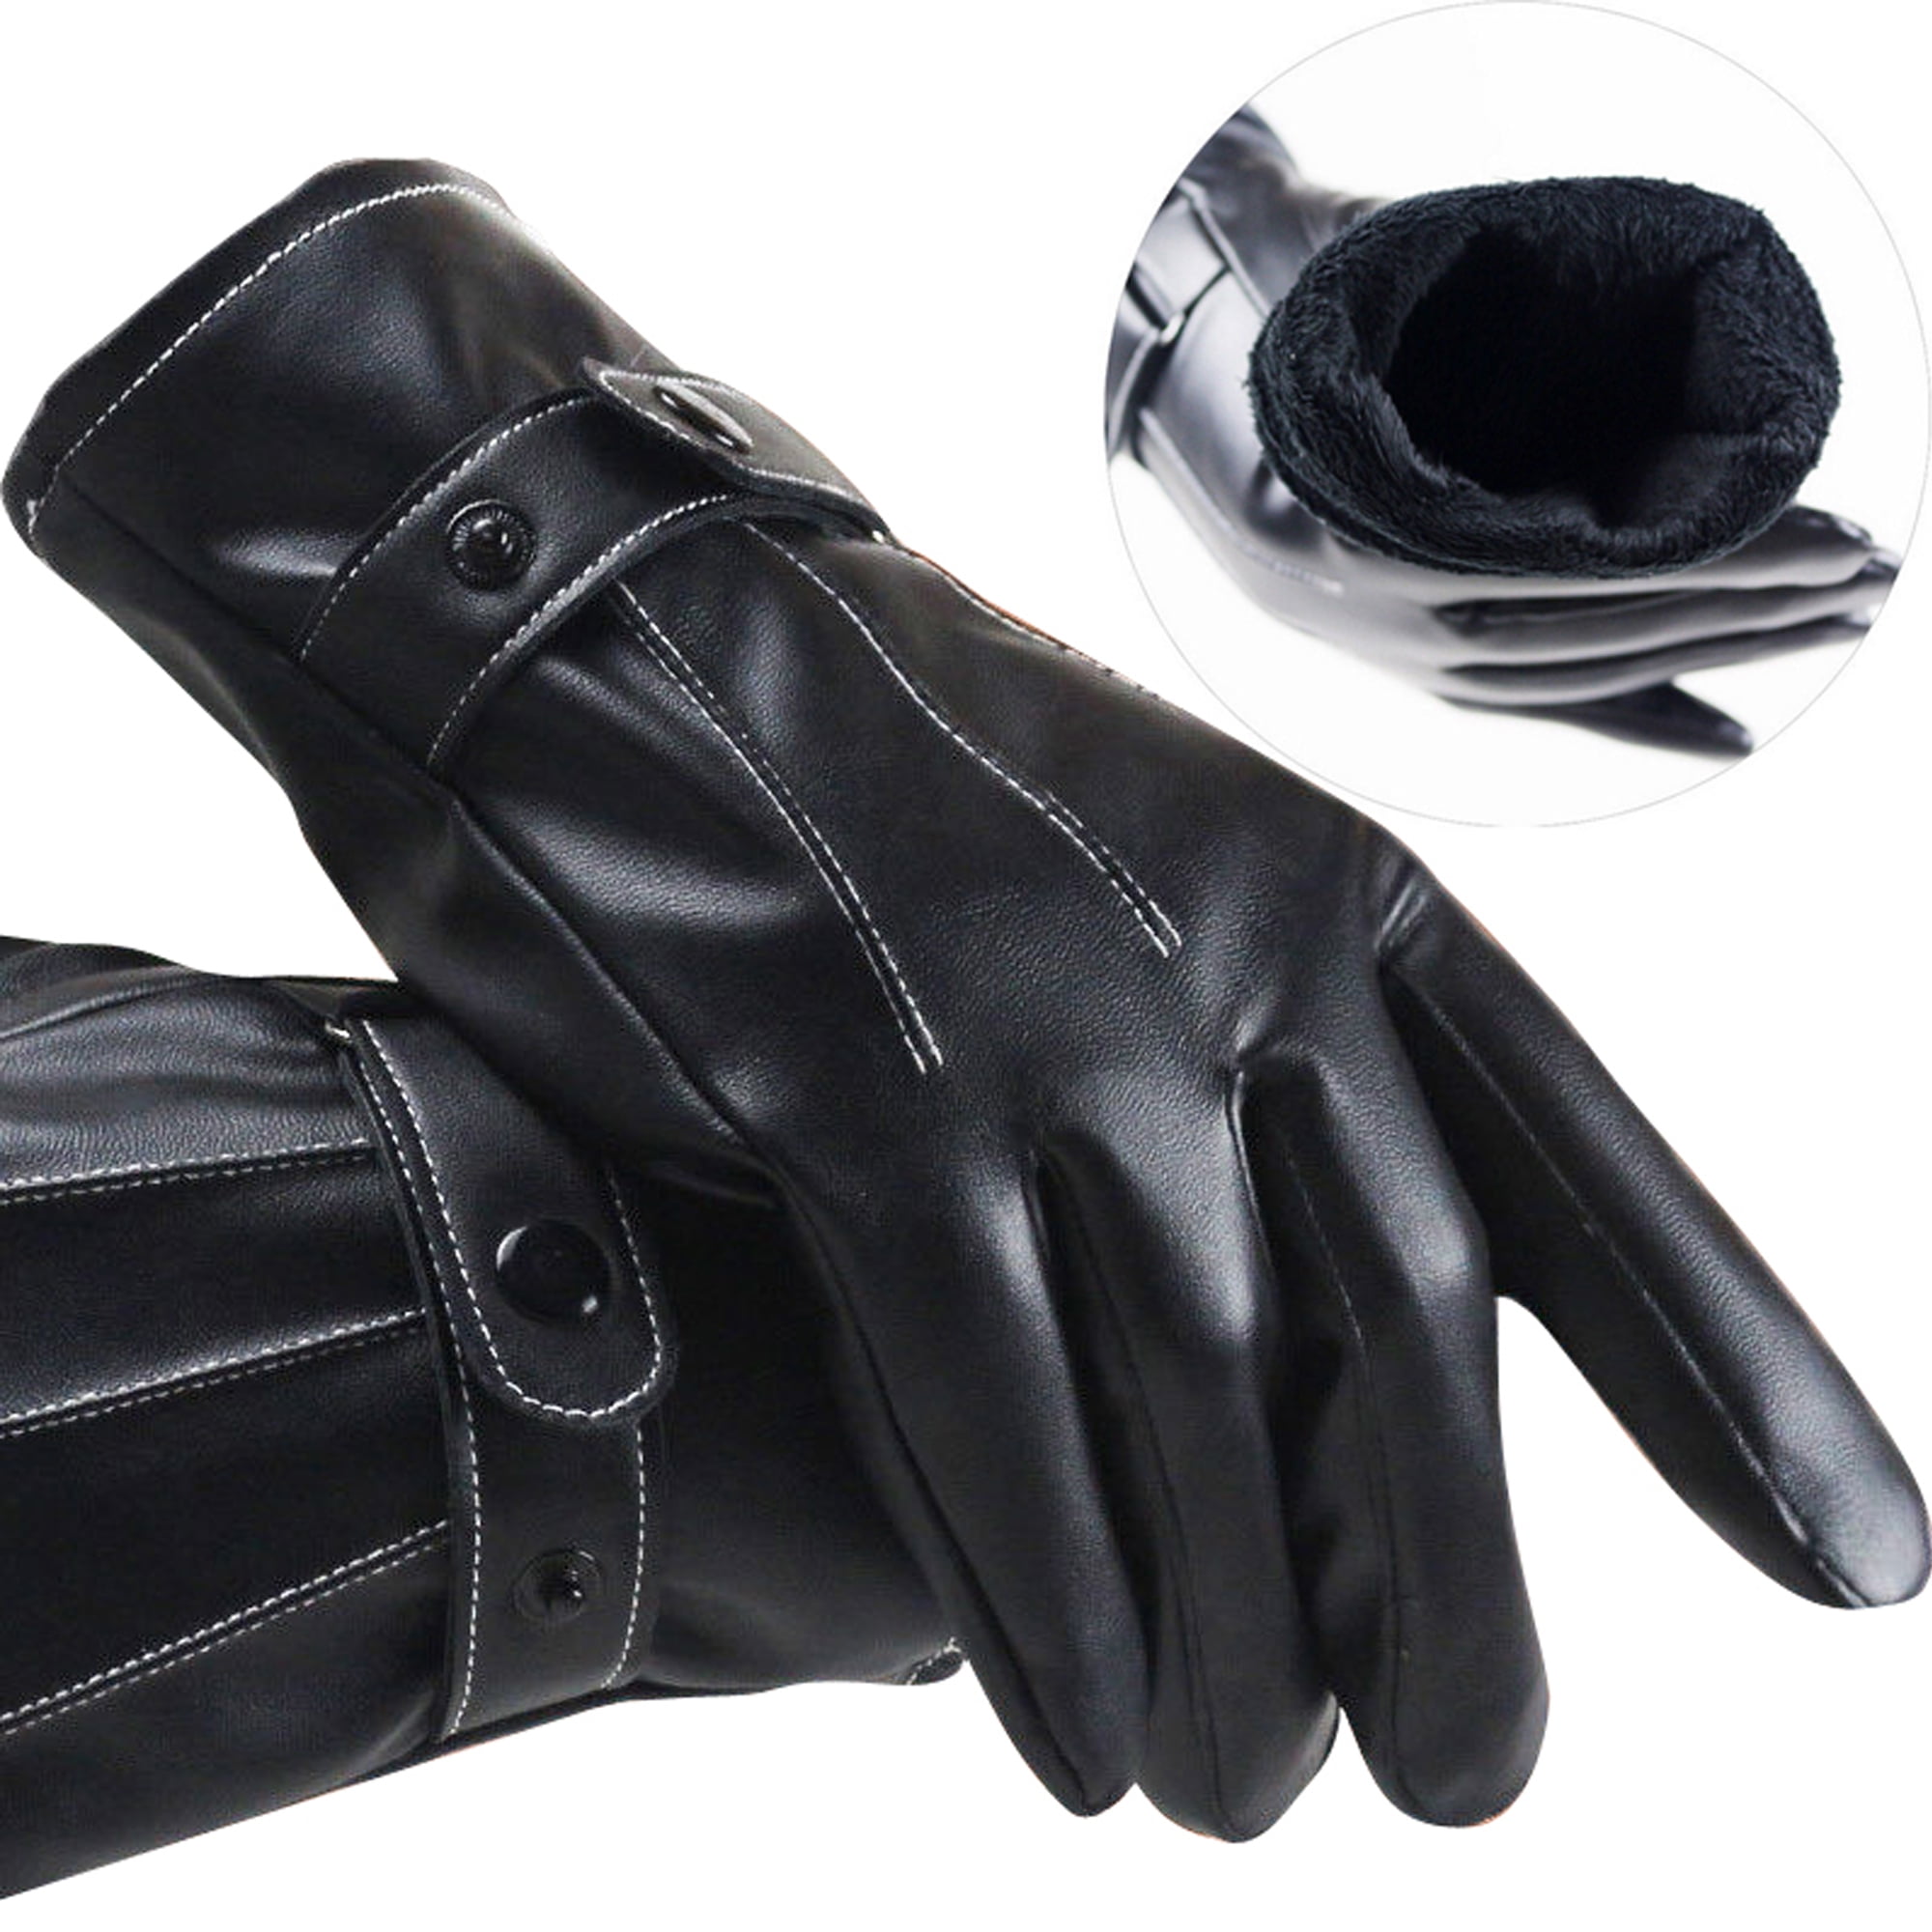 MENS TOUCH SCREEN REAL LEATHER GLOVES THERMAL LINED BLACK DRIVING WINTER GIFT 